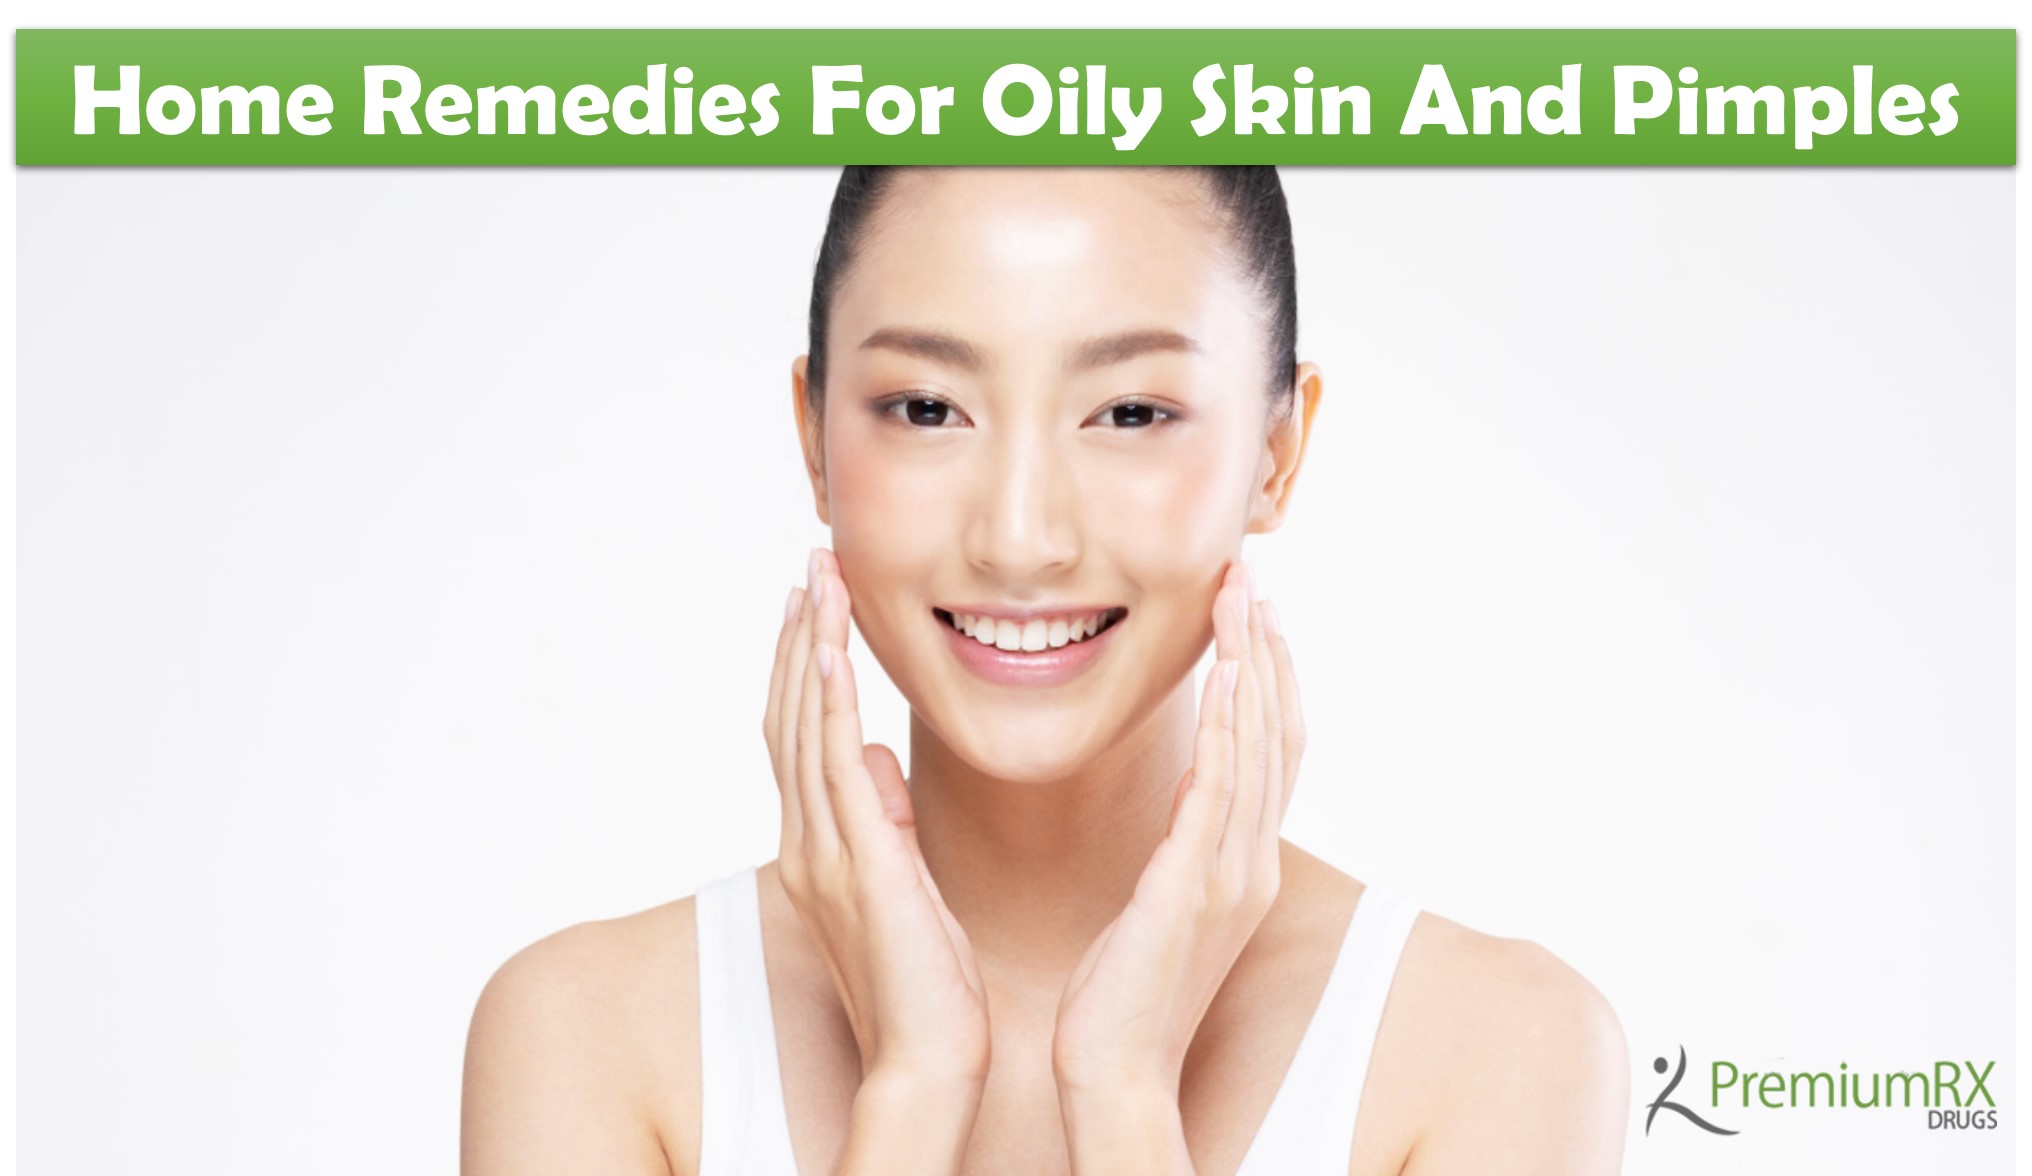 Home Remedies For Oily Skin And Pimples